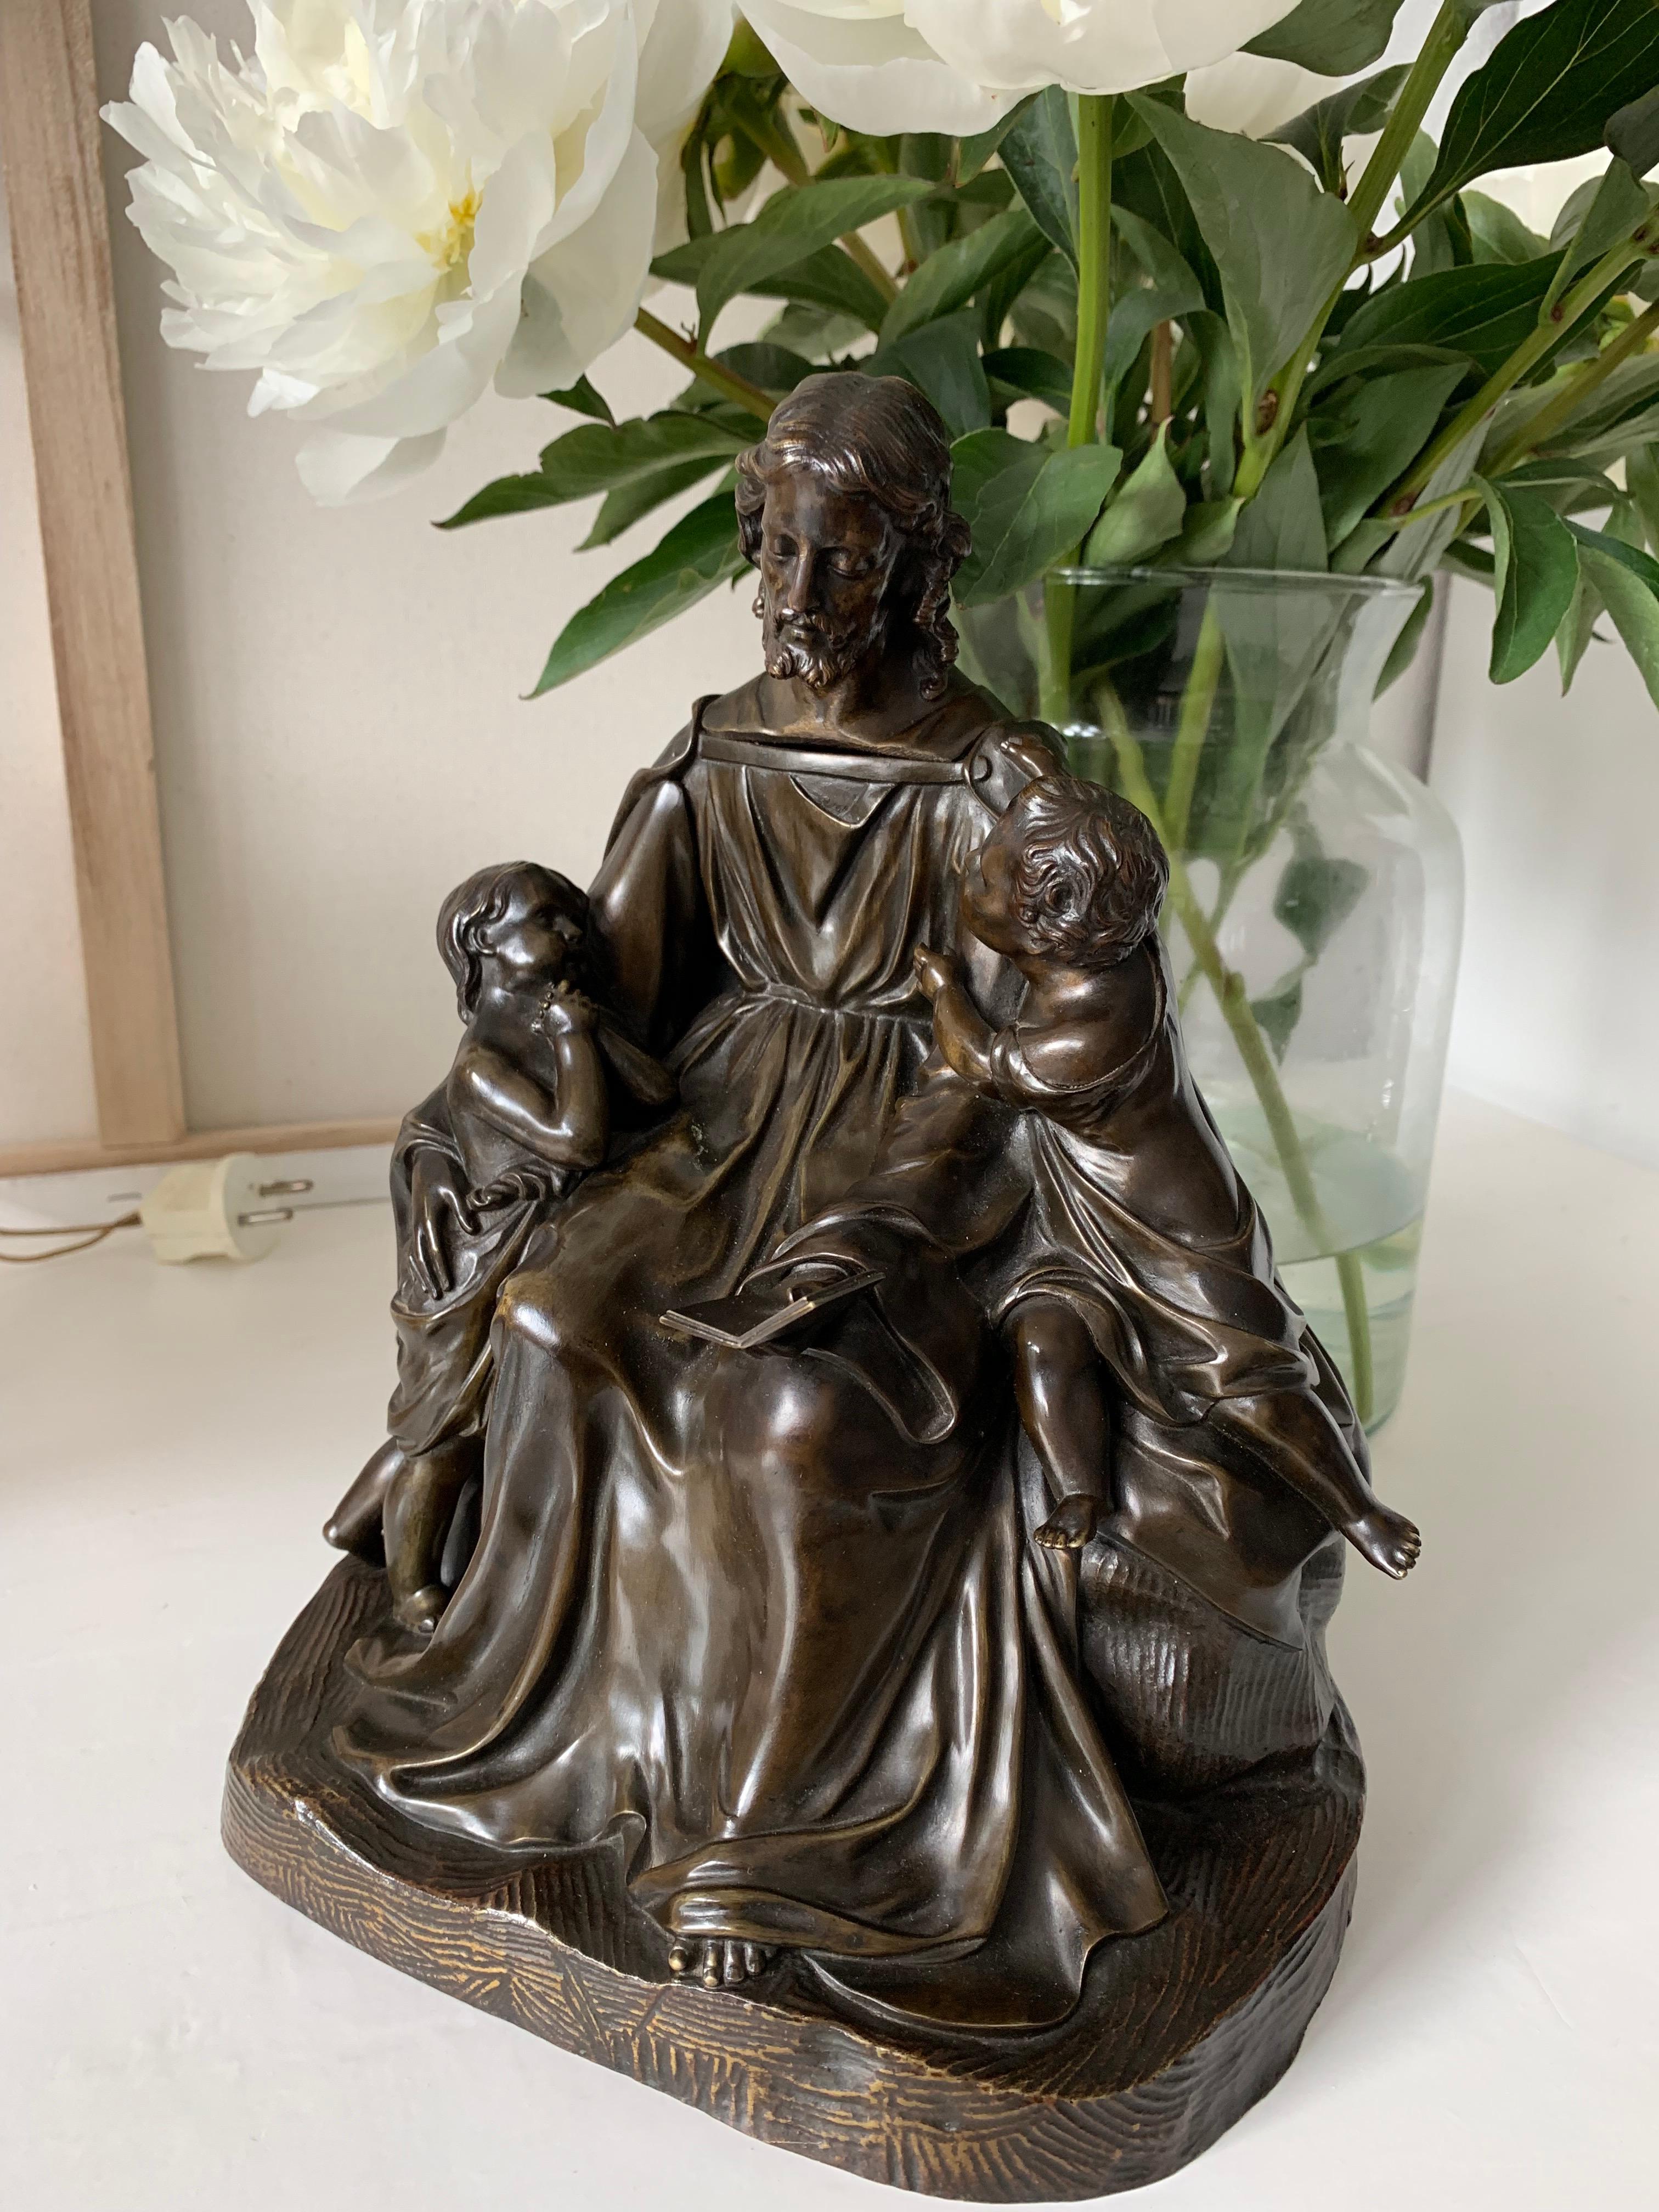 19th century finest bronze group statue. 

This excellent quality and very refined sculpture of Christ with children is another one of our recent great finds. Anyone who knows what it takes to create a bronze sculpture from start to finish realizes